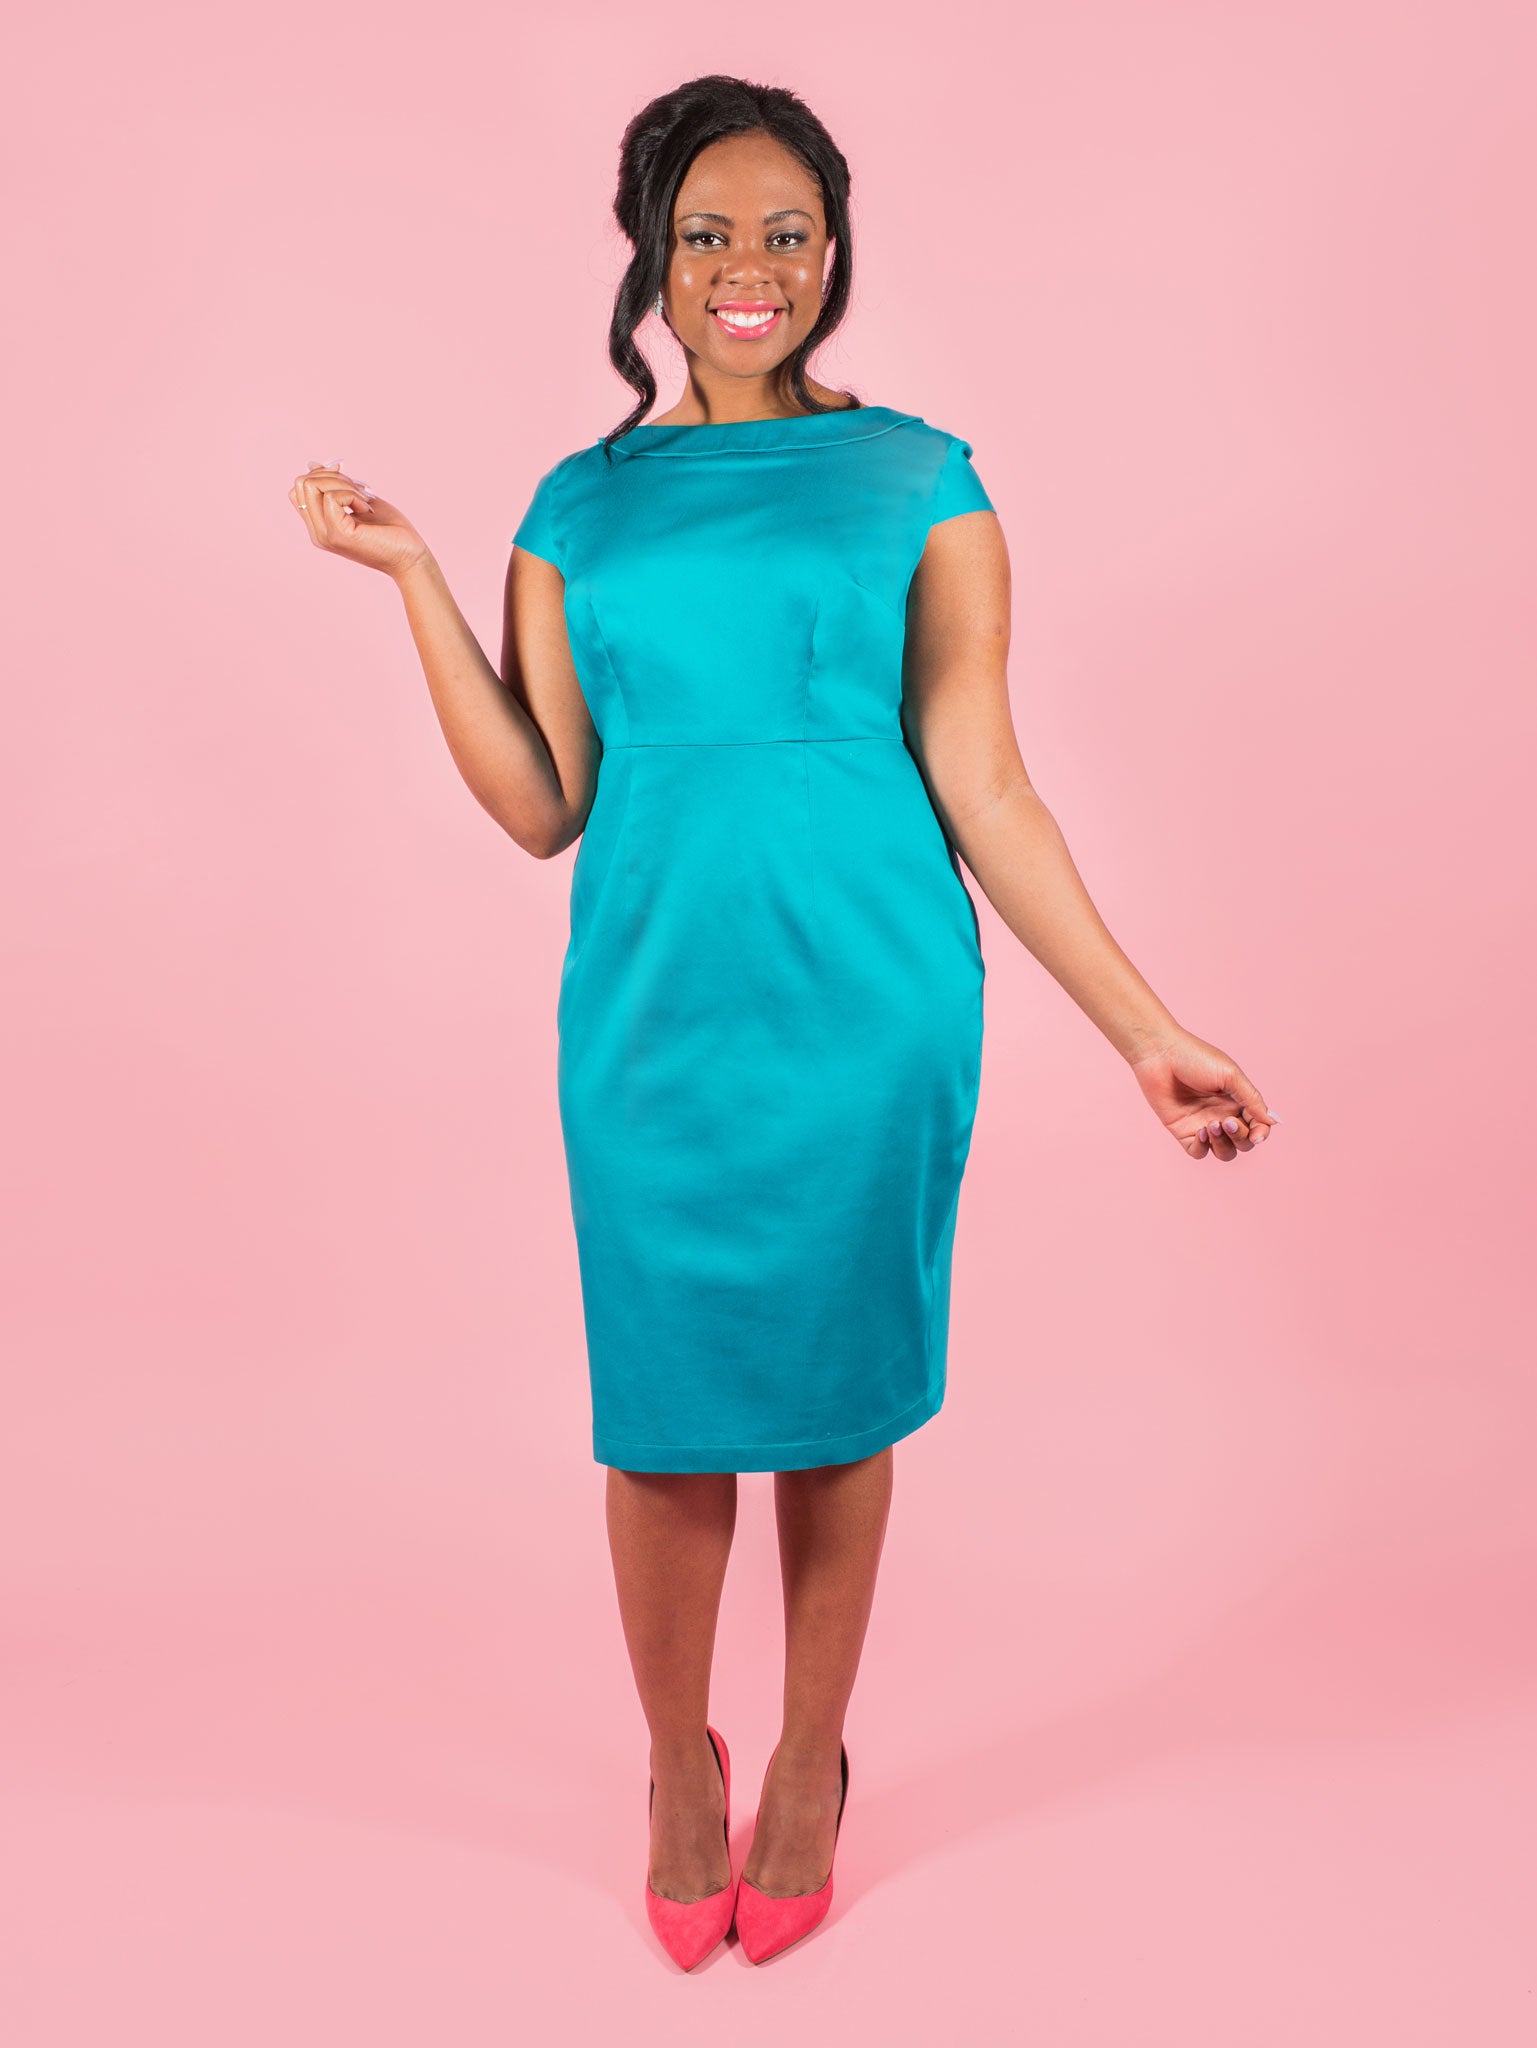 Tilly and the Buttons - Etta Dress Sewing Pattern